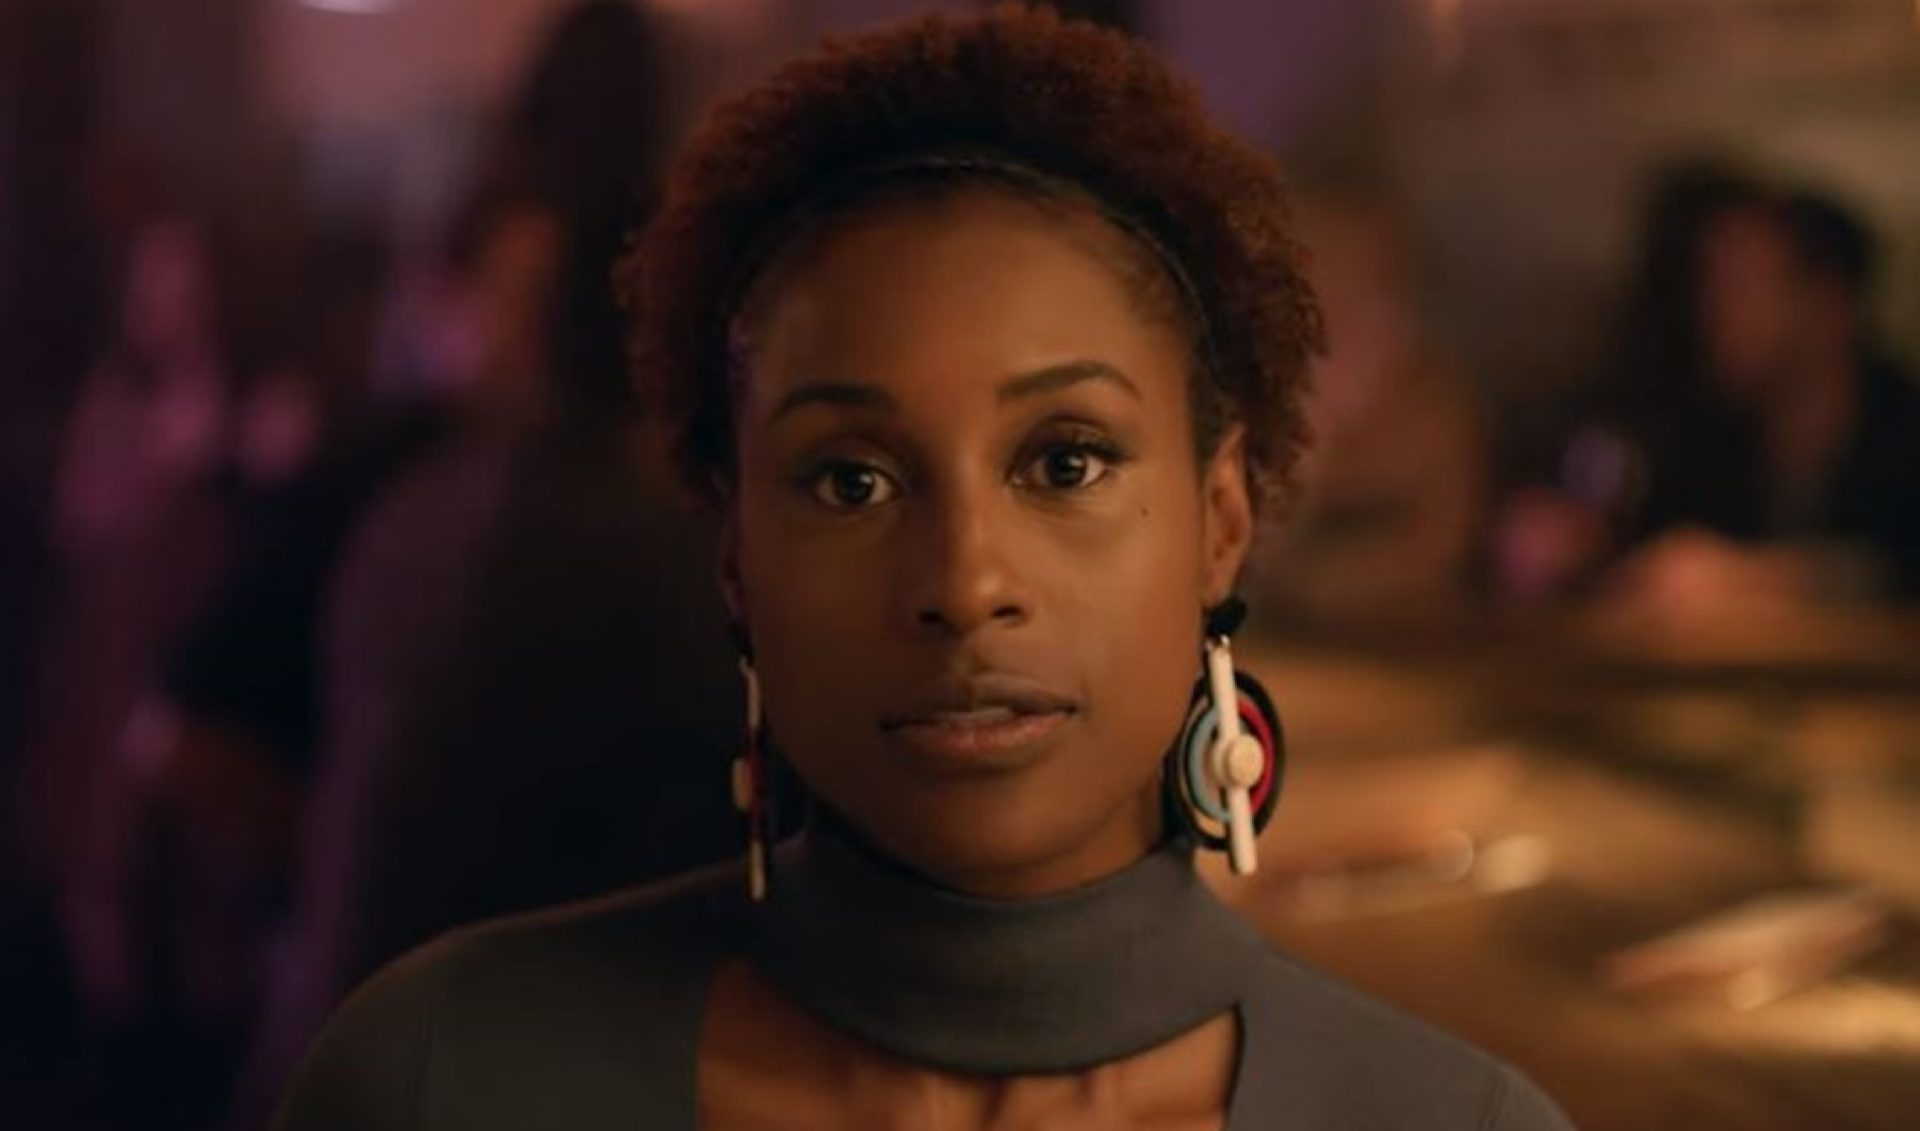 HBO To Stream ‘Insecure’ For Free On YouTube Ahead Of Season 2 Premiere